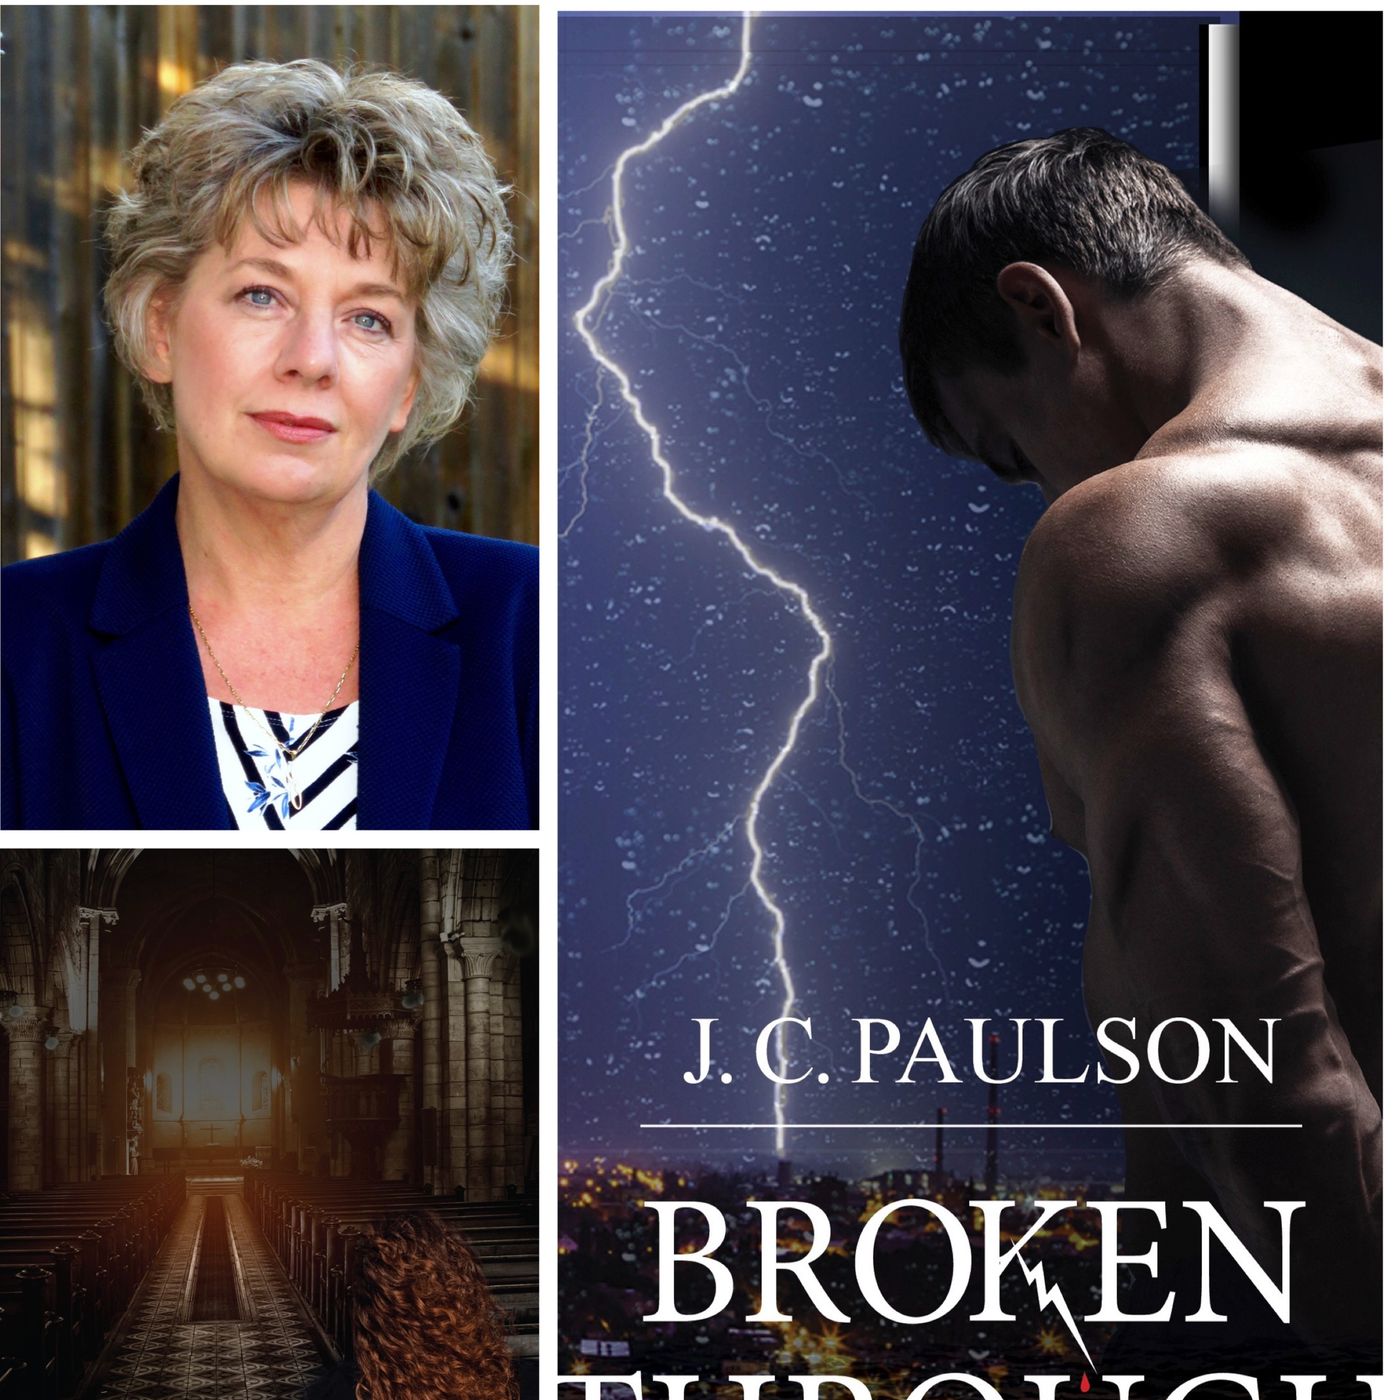 J.C. PAULSON: The Friday Night Chat Show and her writing life. #071